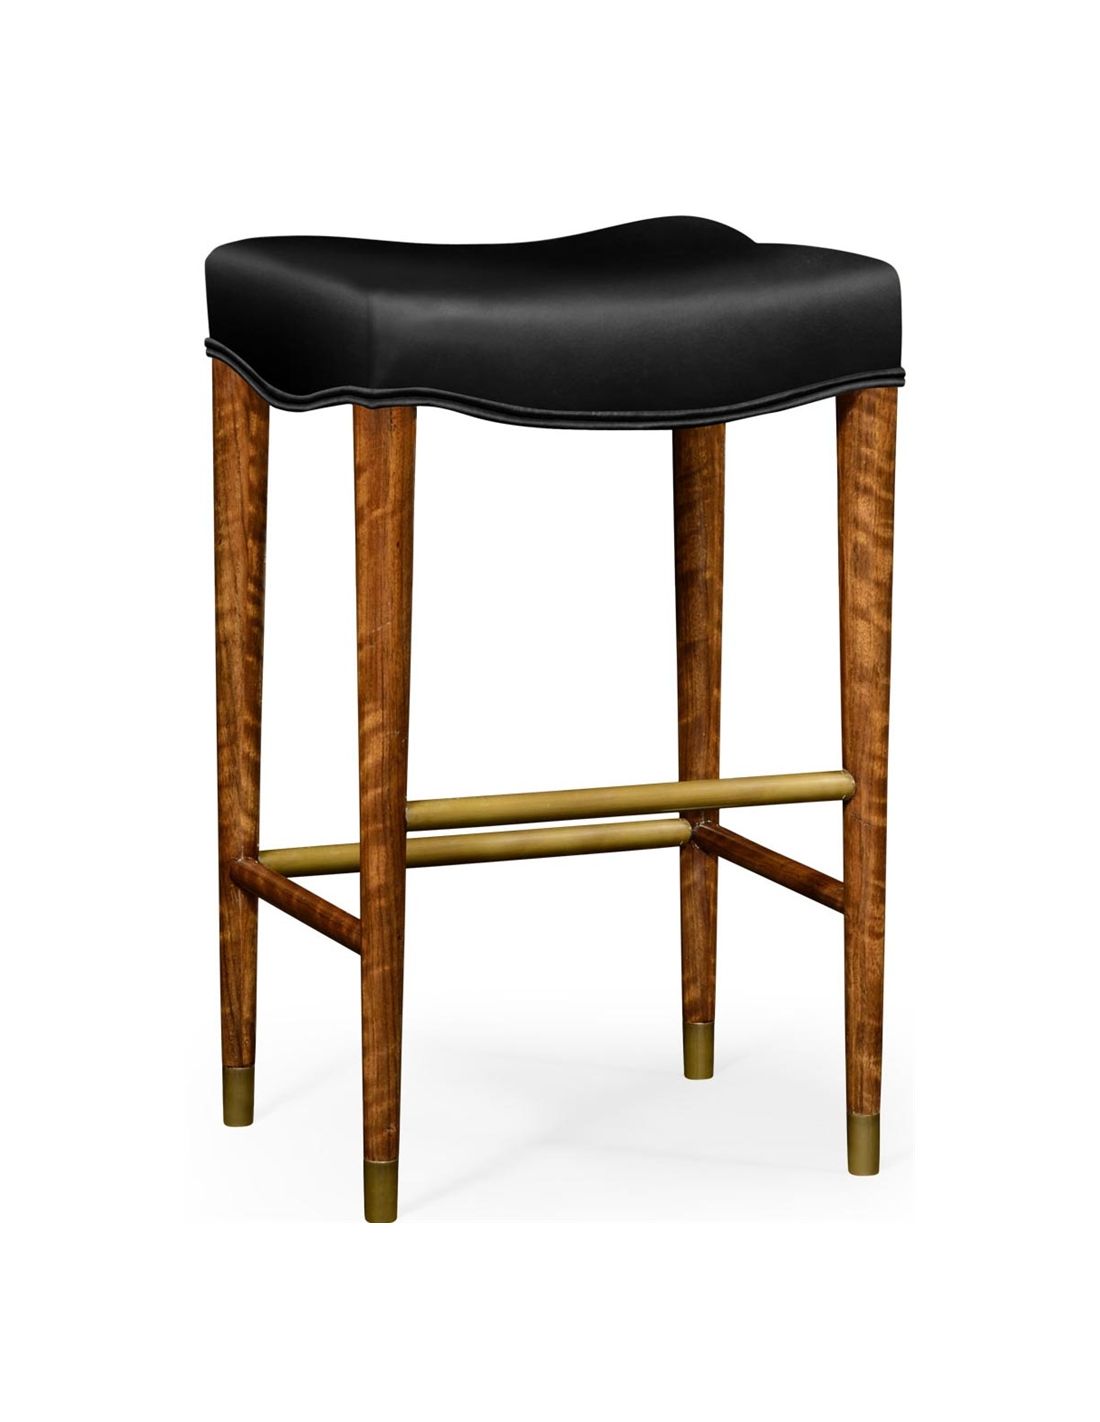 Black Leather Barstool With Wood Legs, Small Leather Stool